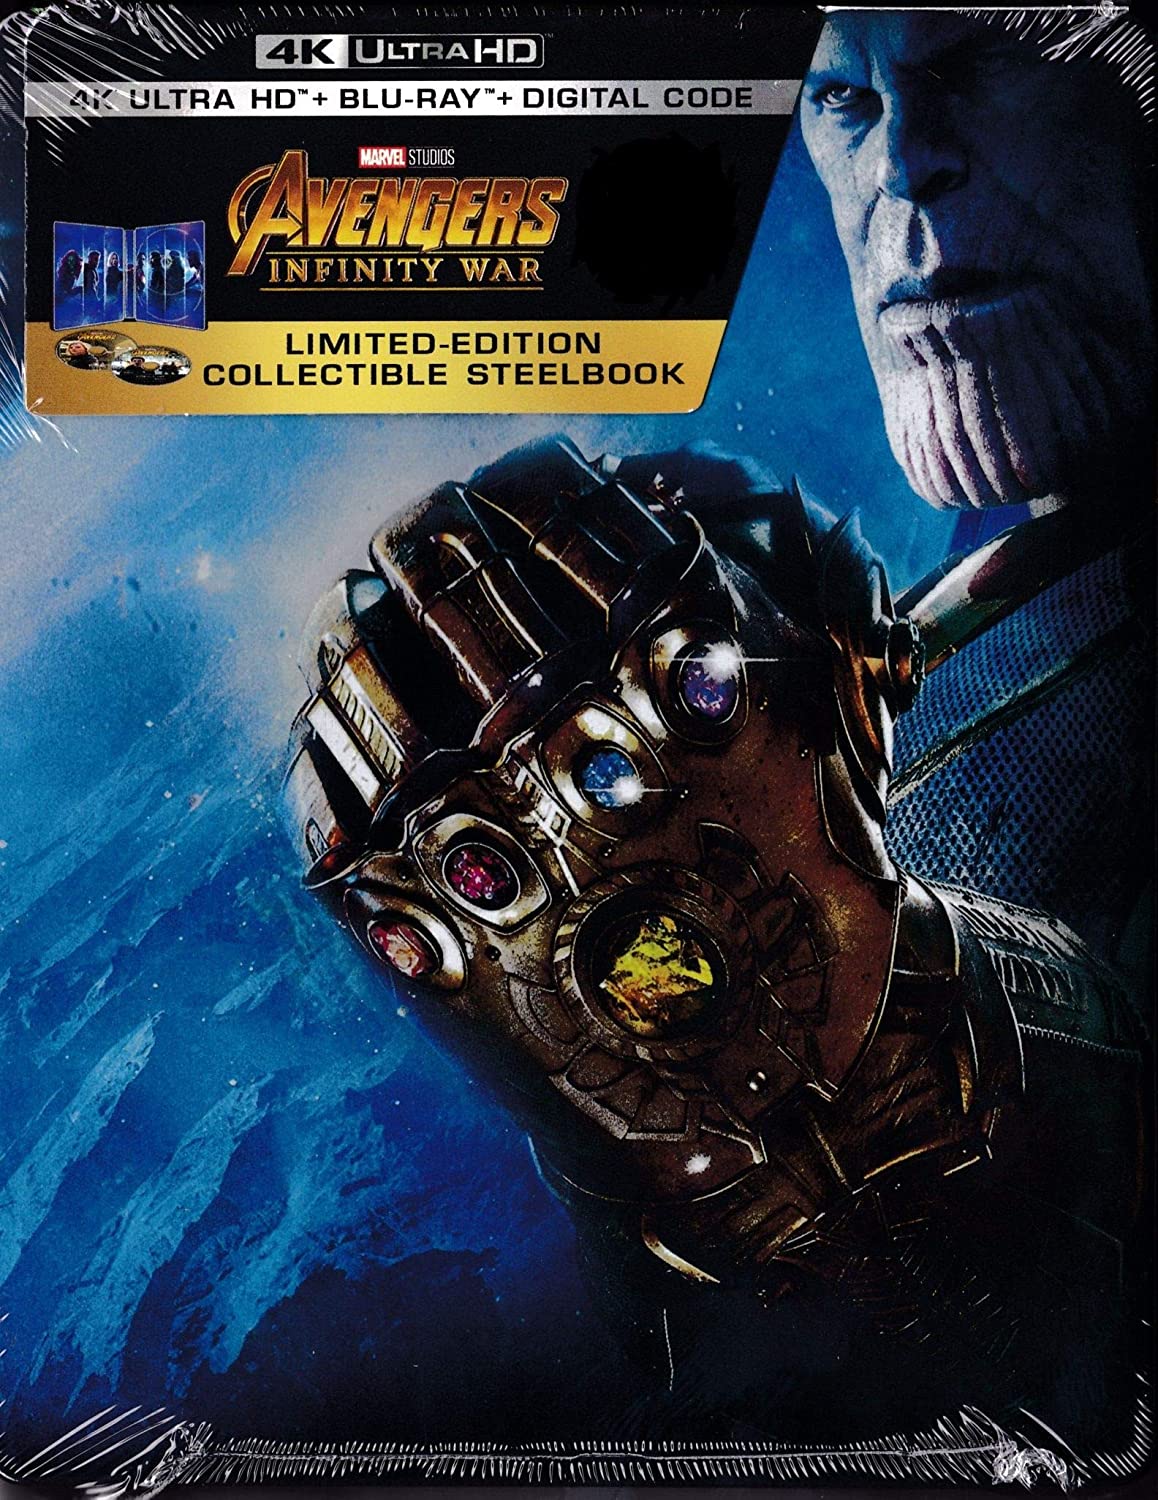 Avengers: Infinity War (2018) Vudu or Movies Anywhere 4K redemption only